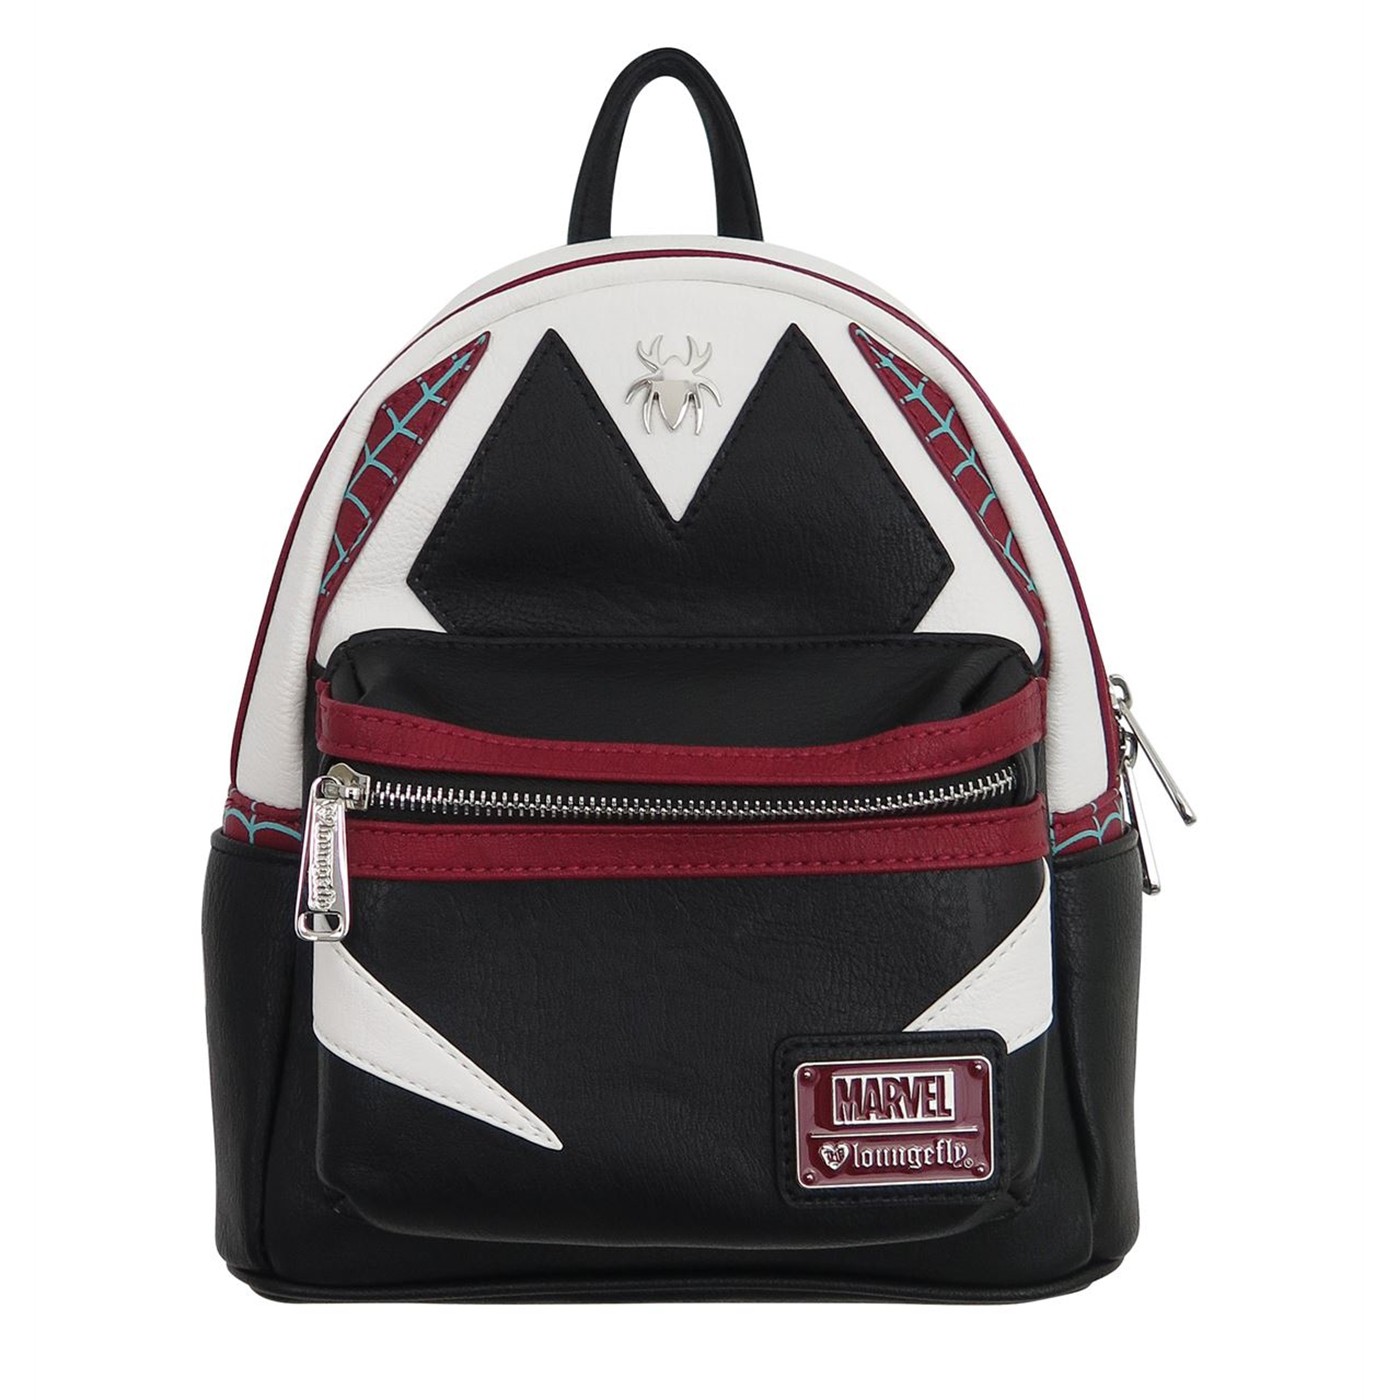 Spider-Gwen Loungefly Mini Backpack